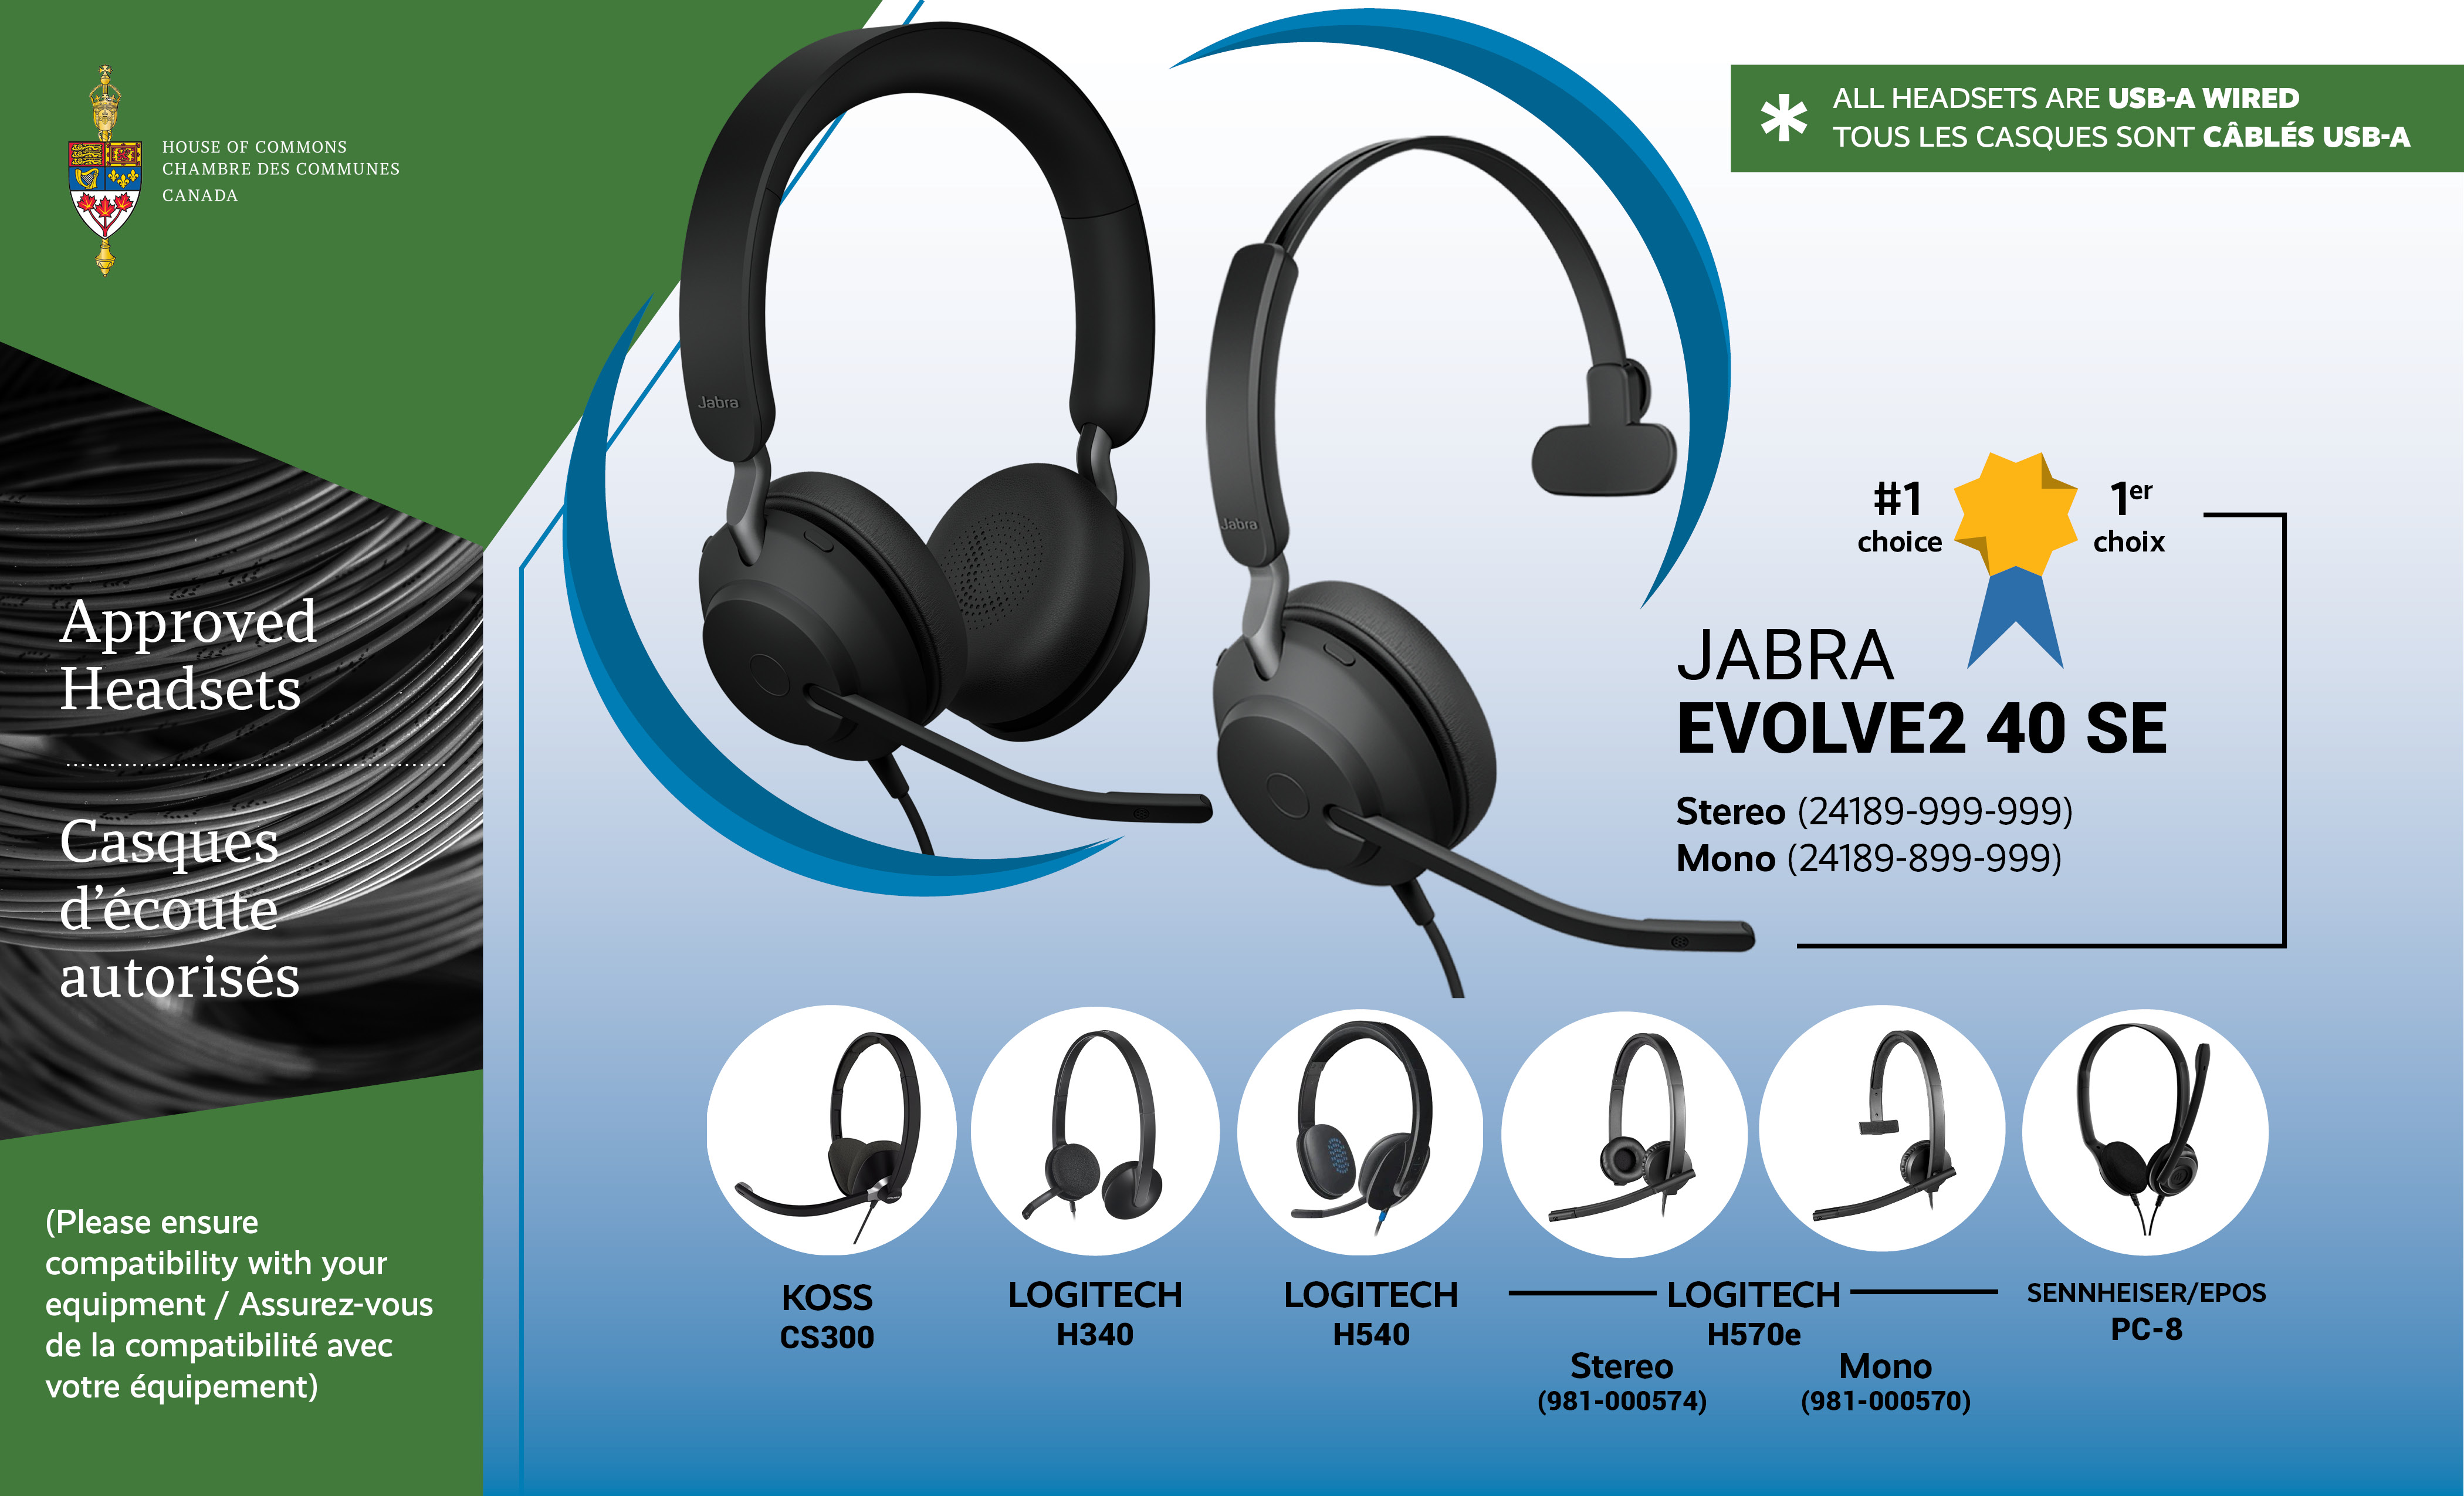 This graphic lists the six pre-approved headsets that can be used for appearances before committee meetings. The number one choice is the Jabra Evolve 40 SE (Stereo and Mono). The other choices are the following: Sennheiser/EPOS PC-8 USB, Logitech H570e (Stereo and Mono), Logitech H340, Logitech H540 and Koss CS300. All headsets are USB-A wired.